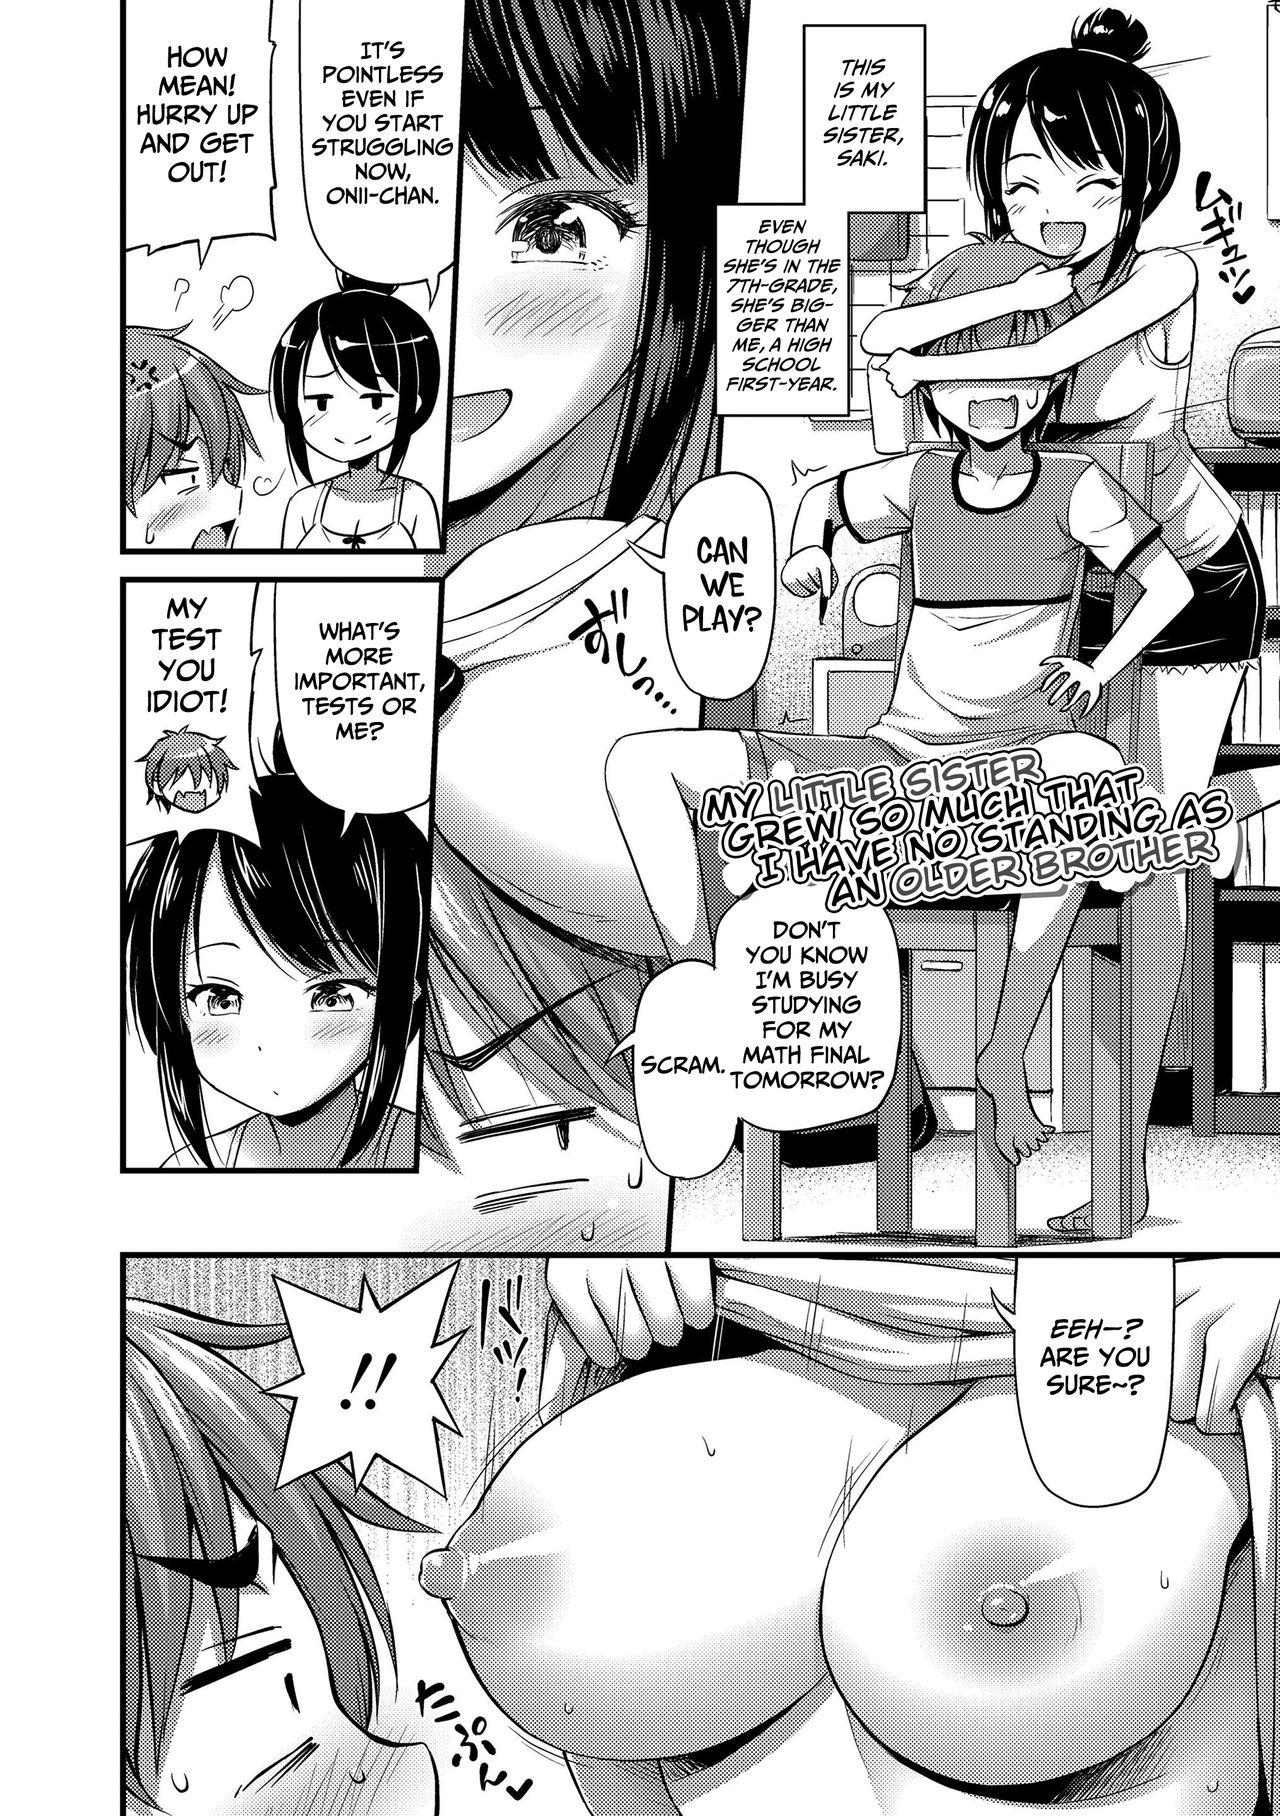 Lovers Imouto ga Sodachi Sugite Ani no Tachiba ga Nai | My Little Sister Grew So Much That I Have No Standing as an Older Brother Swinger - Page 2